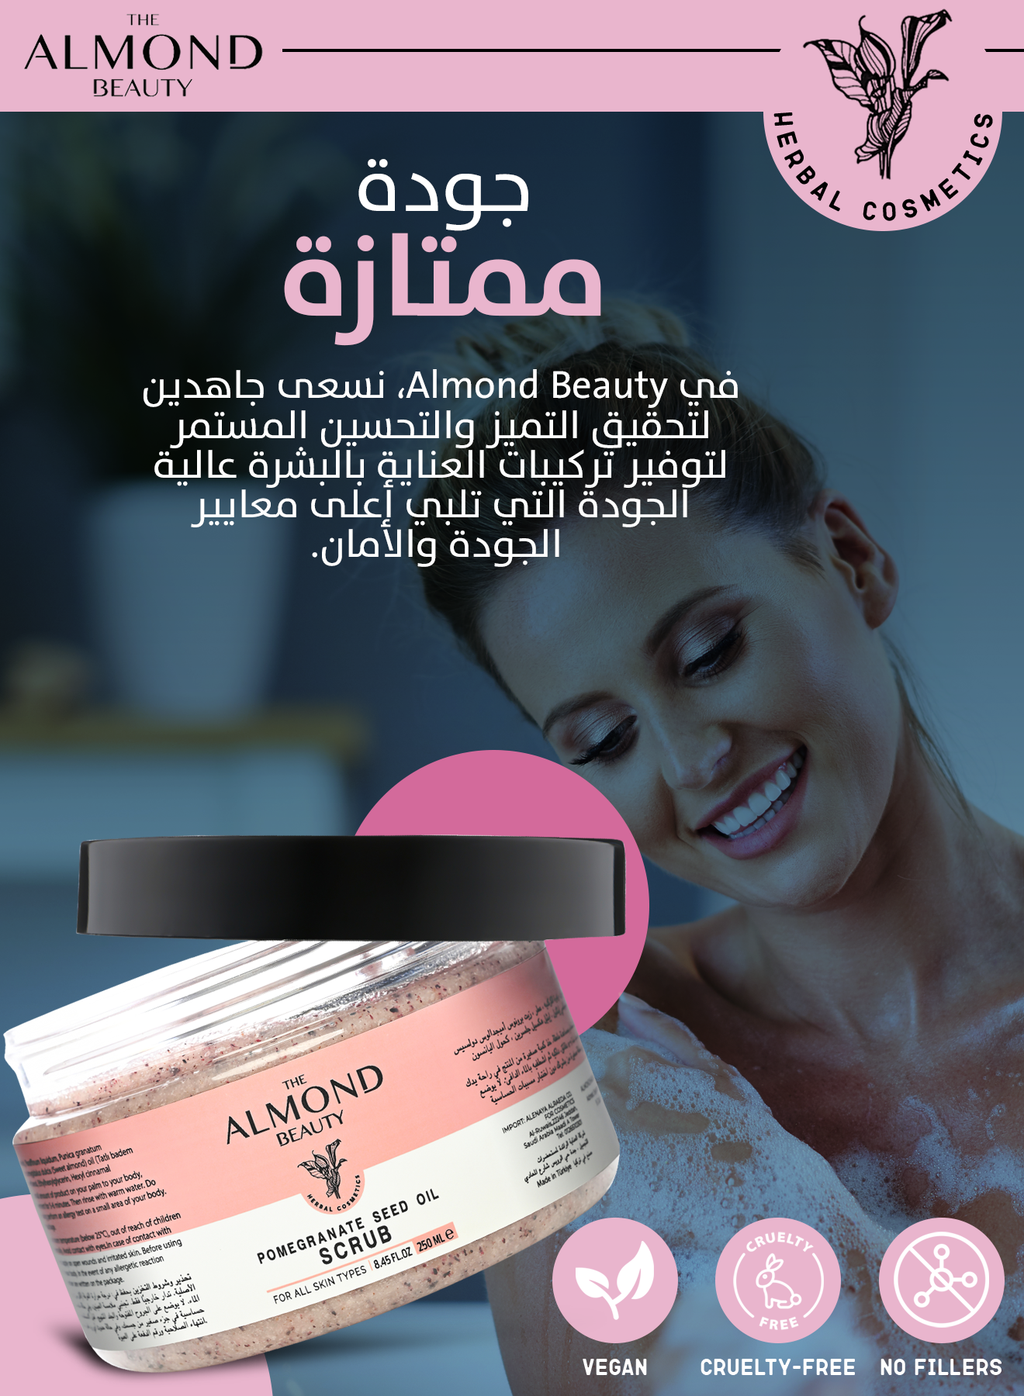 Body Exfoliating Scrub with Pomegranate Seed Extract